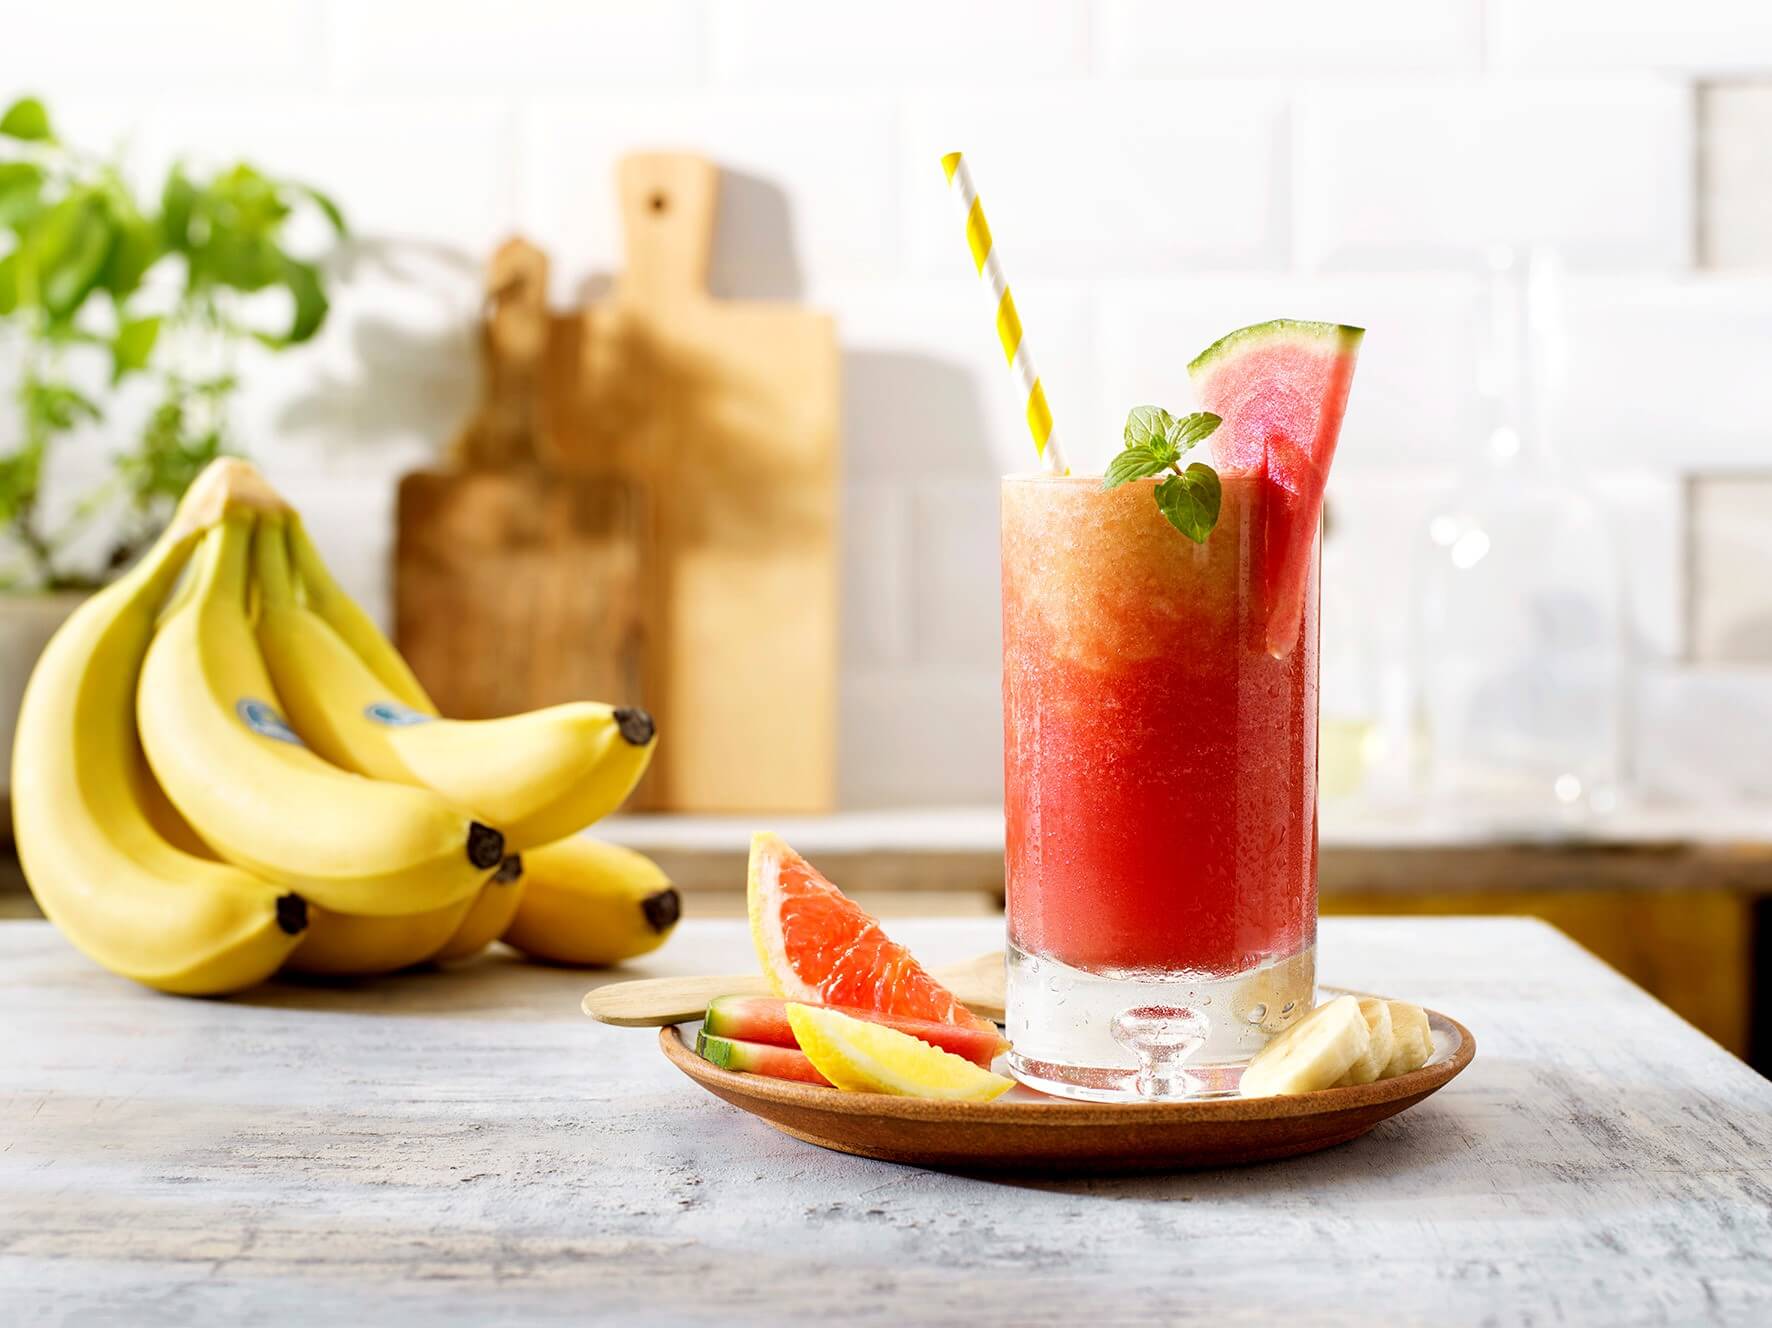 Pink Sunrise mocktail with Chiquita bananas and watermelon